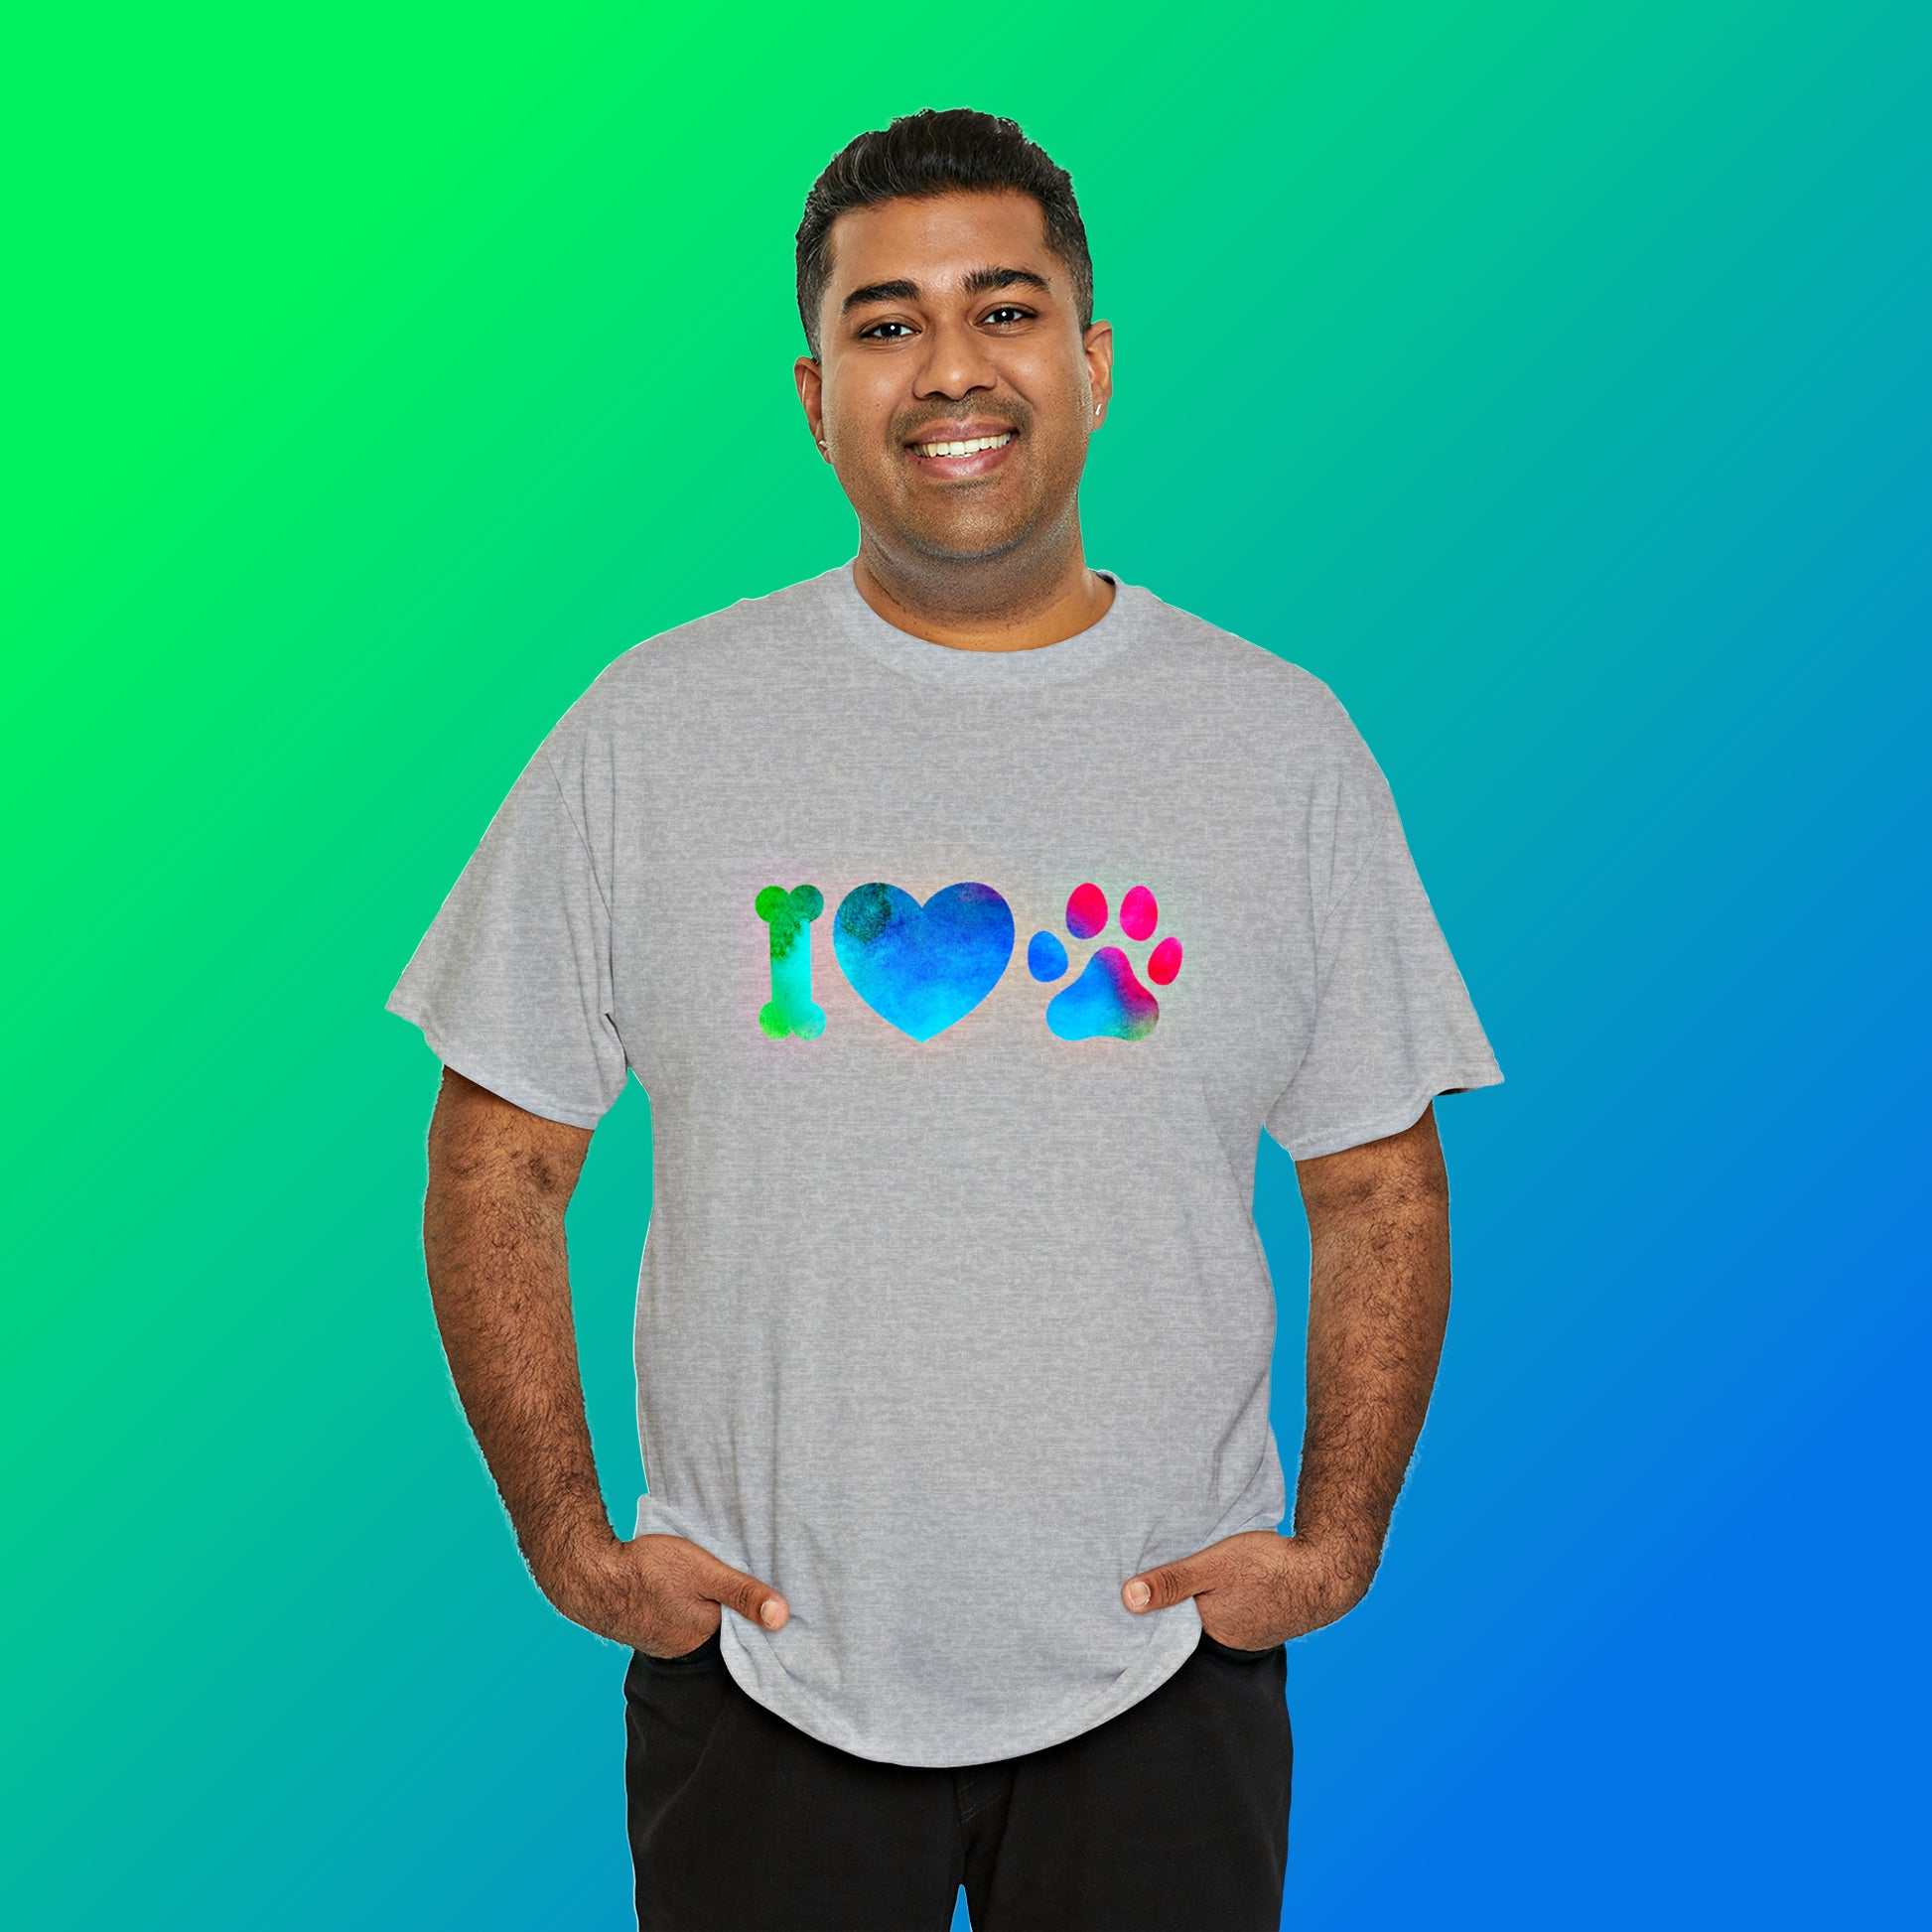 Mock up of a happy man wearing our shirt